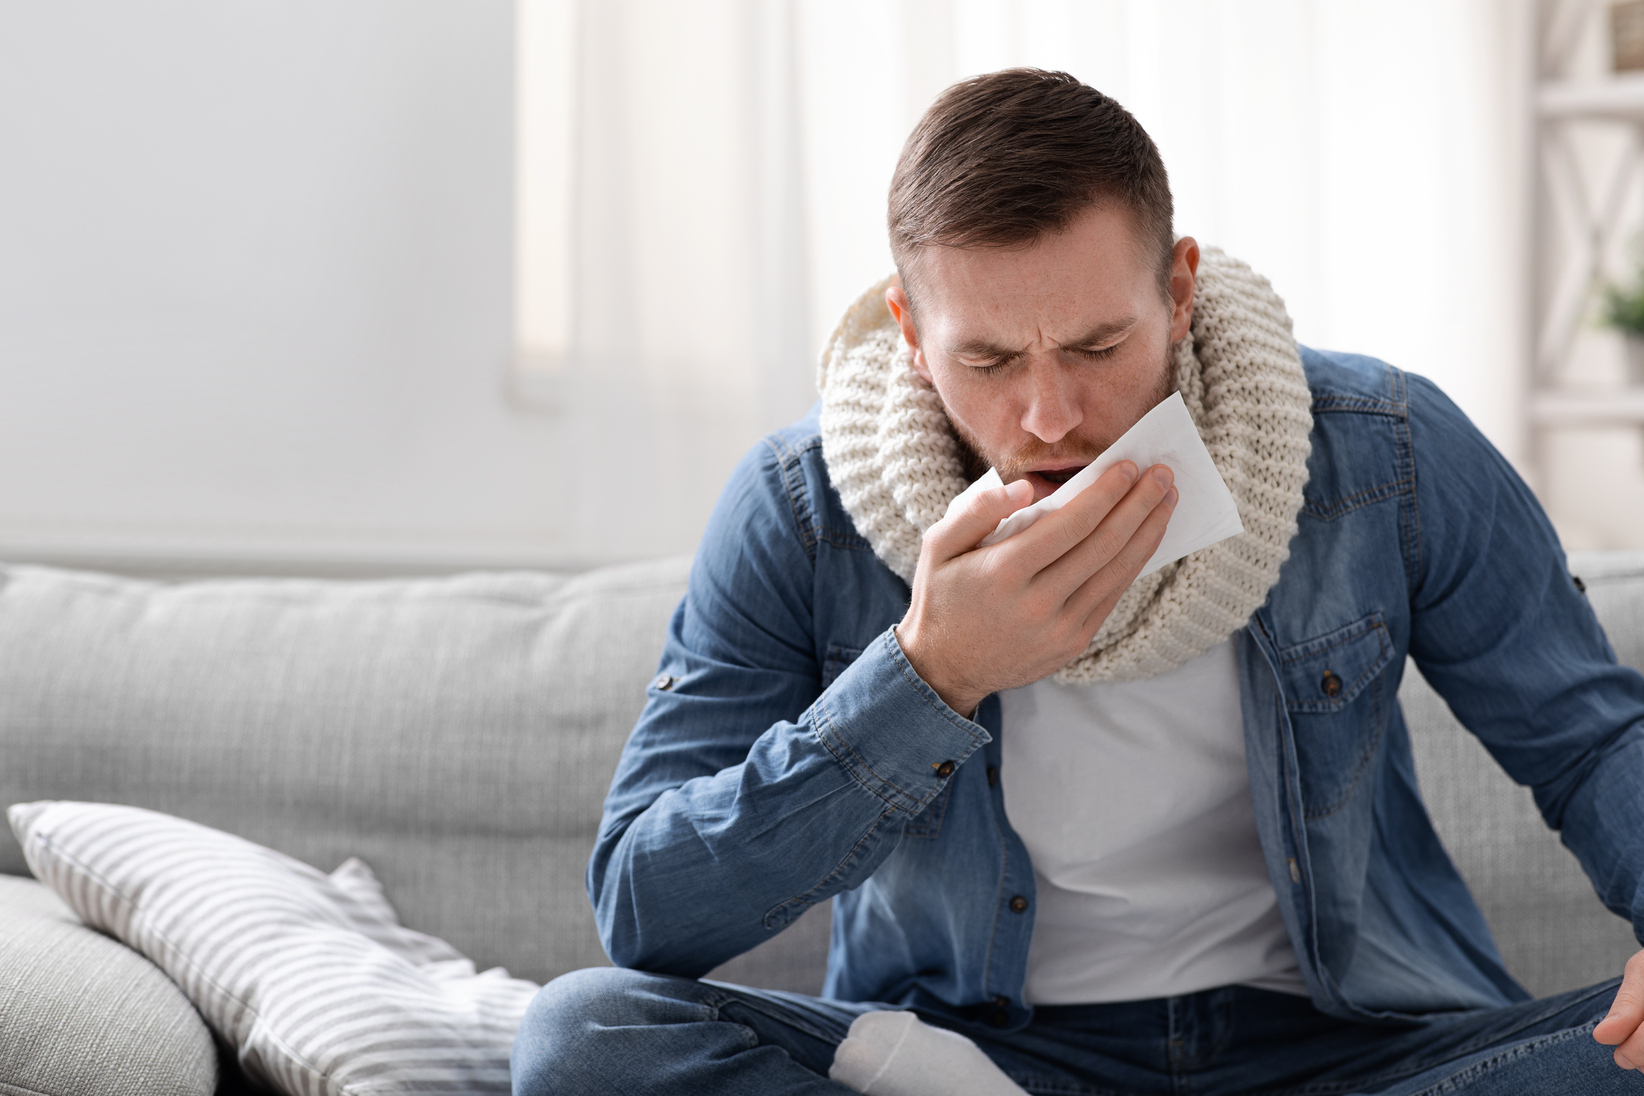 Picture of a man sitting on a couch and coughing because he has tuberculosis.